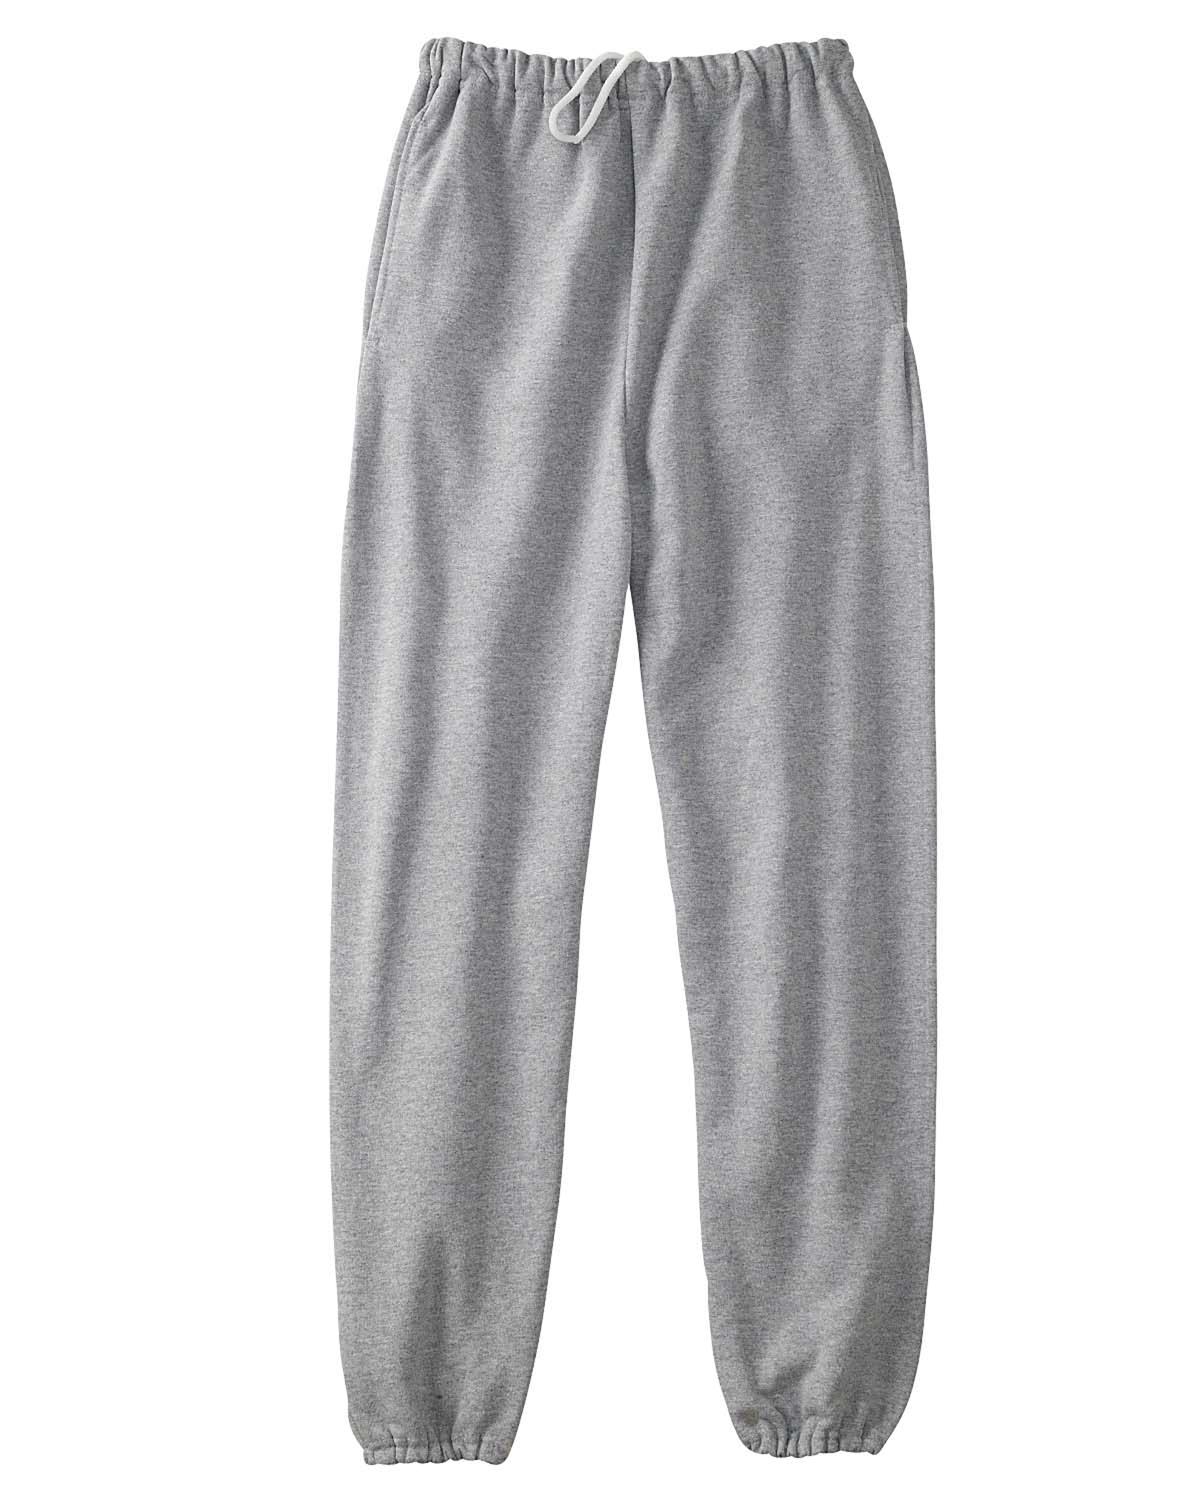 JERZEES 4950BP-Youth Sweatpant With Pockets $9.42 - Youth's Pants